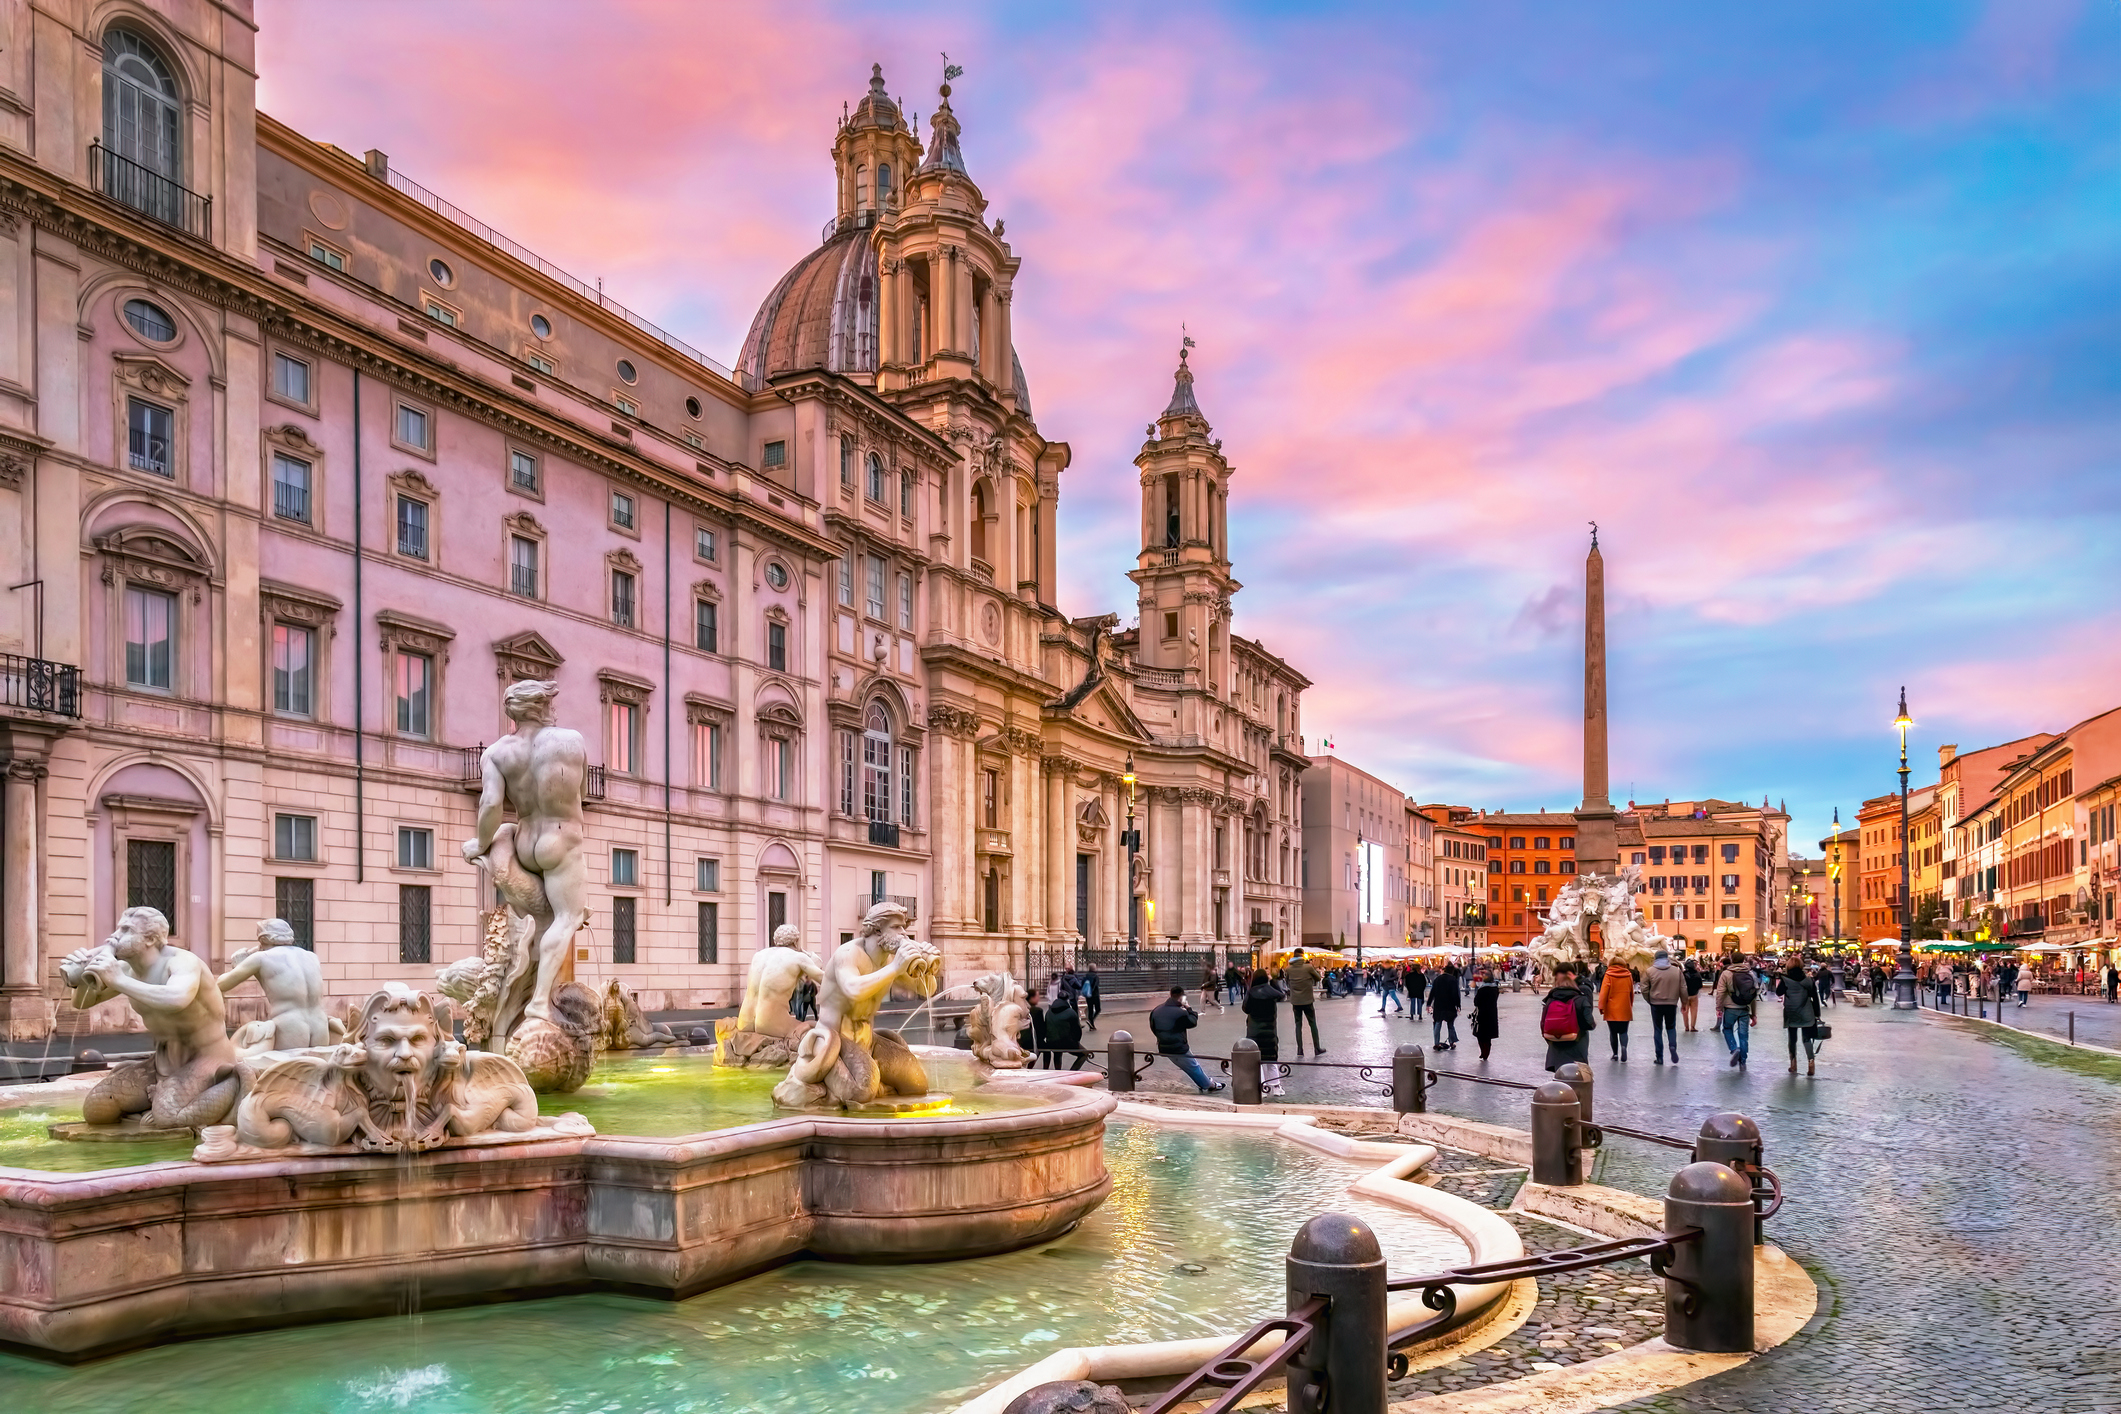 Piazza Navona in Rome with its fountains, ancient buildings, and visitors walking around